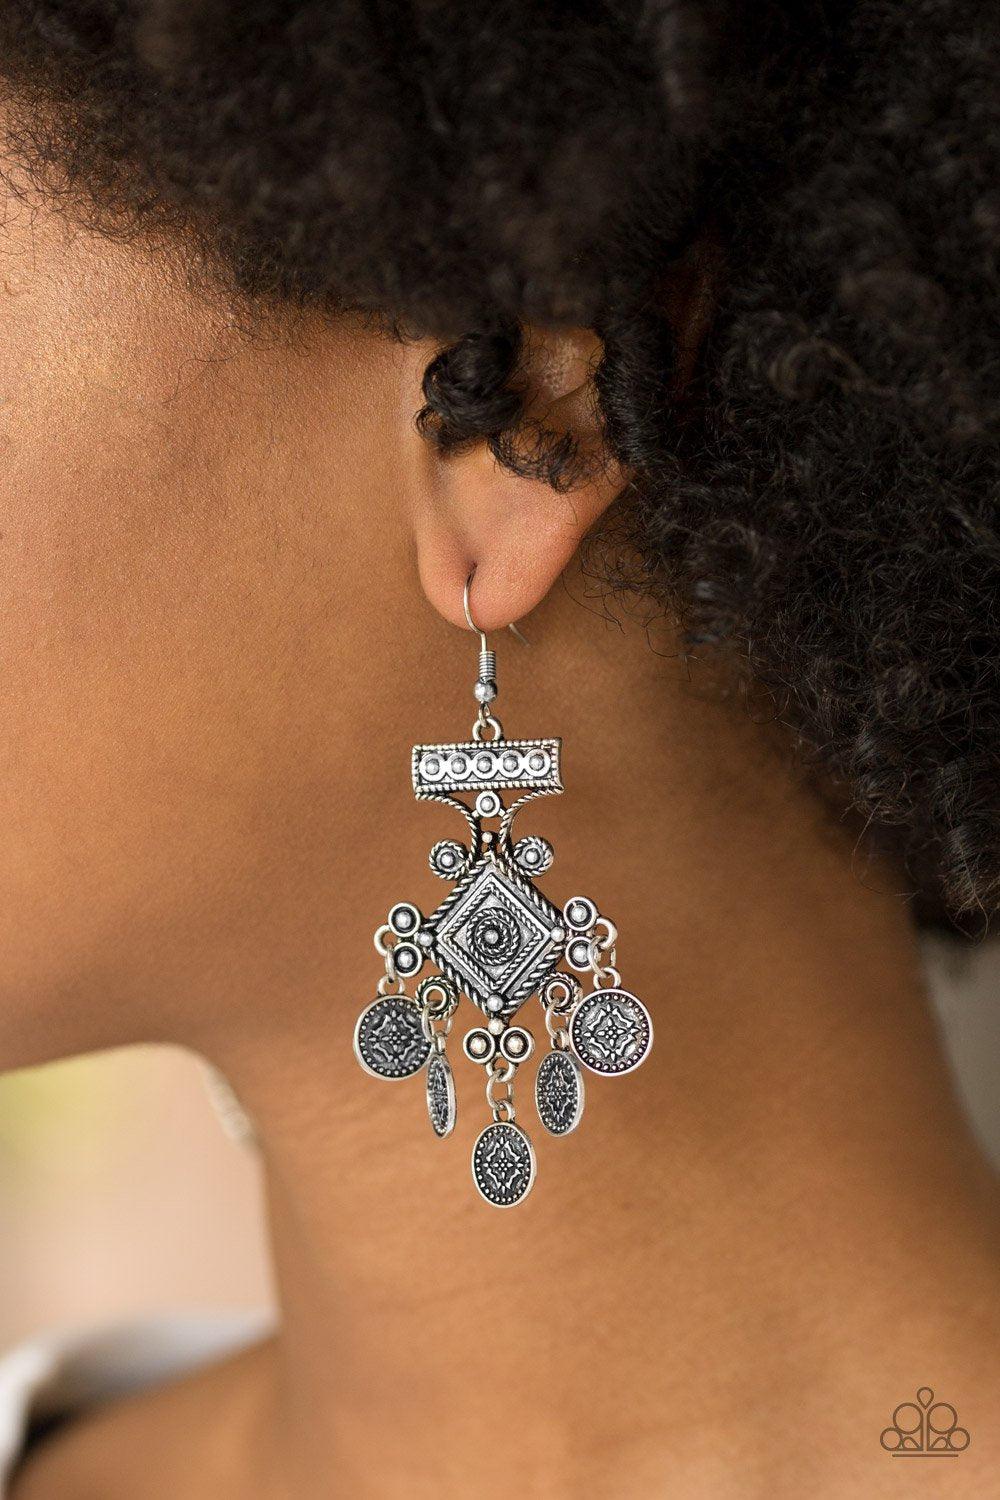 Unexplored Lands Silver Earrings - Paparazzi Accessories-CarasShop.com - $5 Jewelry by Cara Jewels